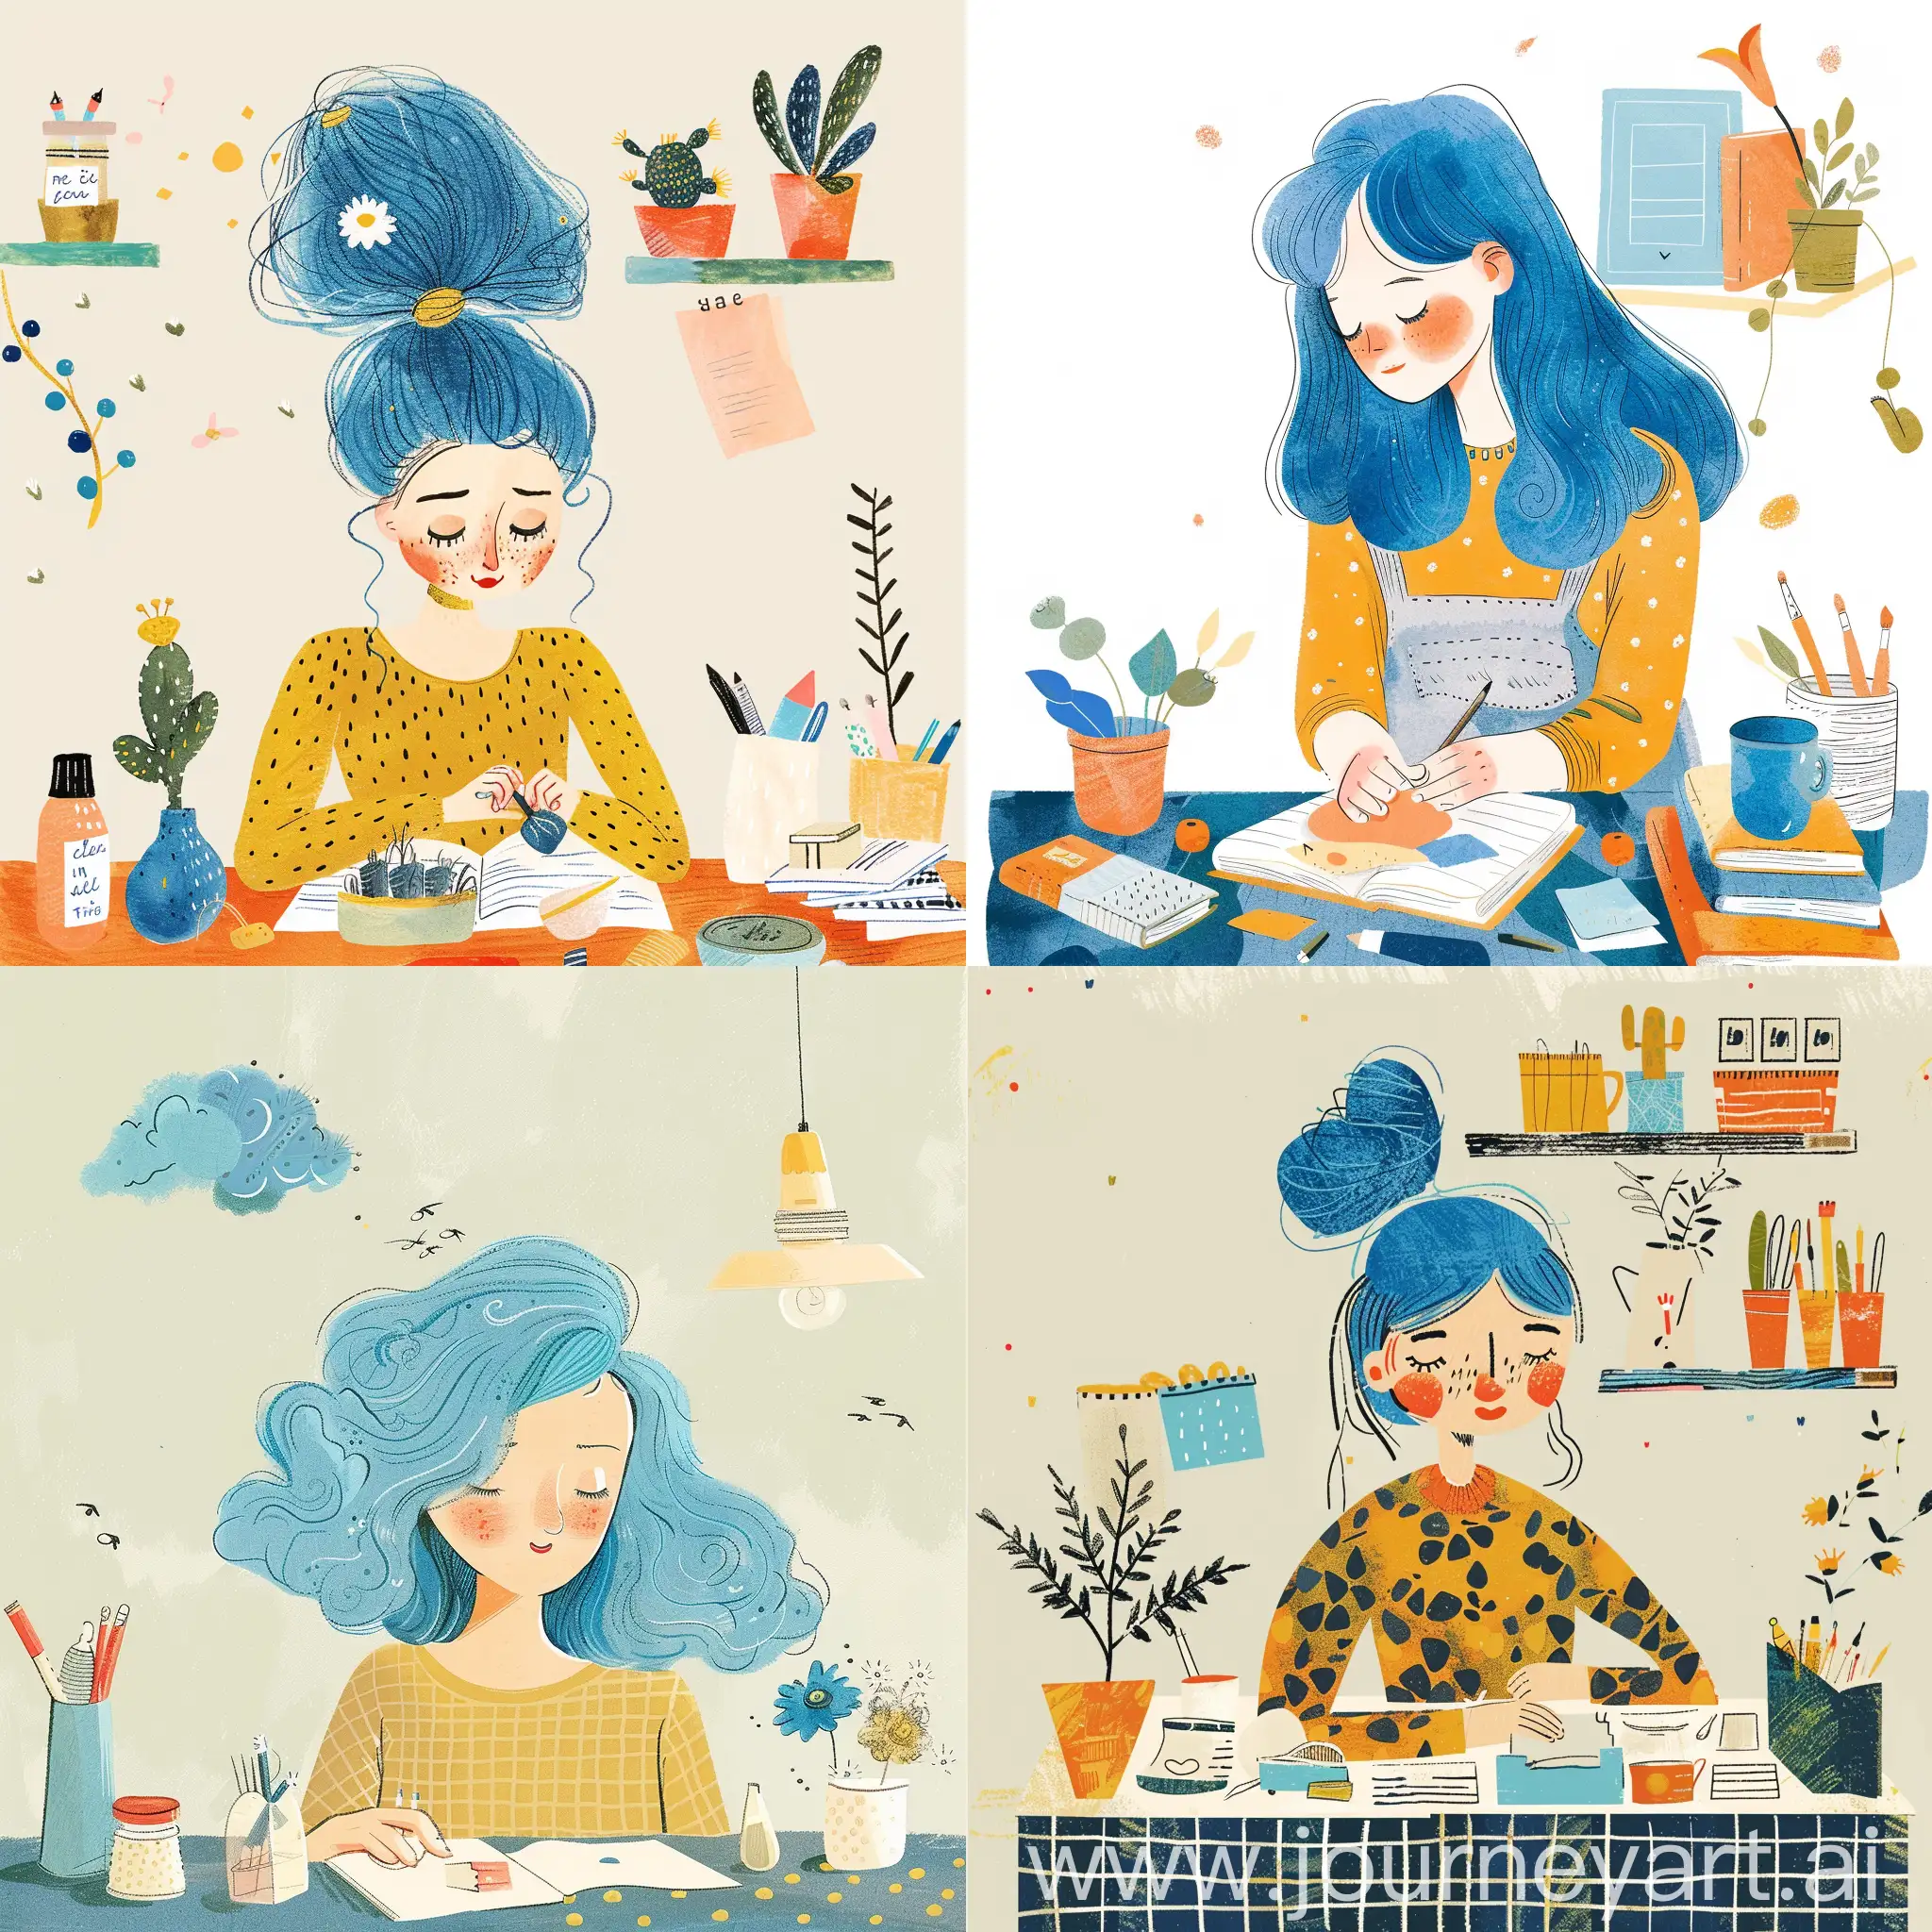 Whimsical-Illustration-BlueHaired-Woman-Engaging-in-Tasks